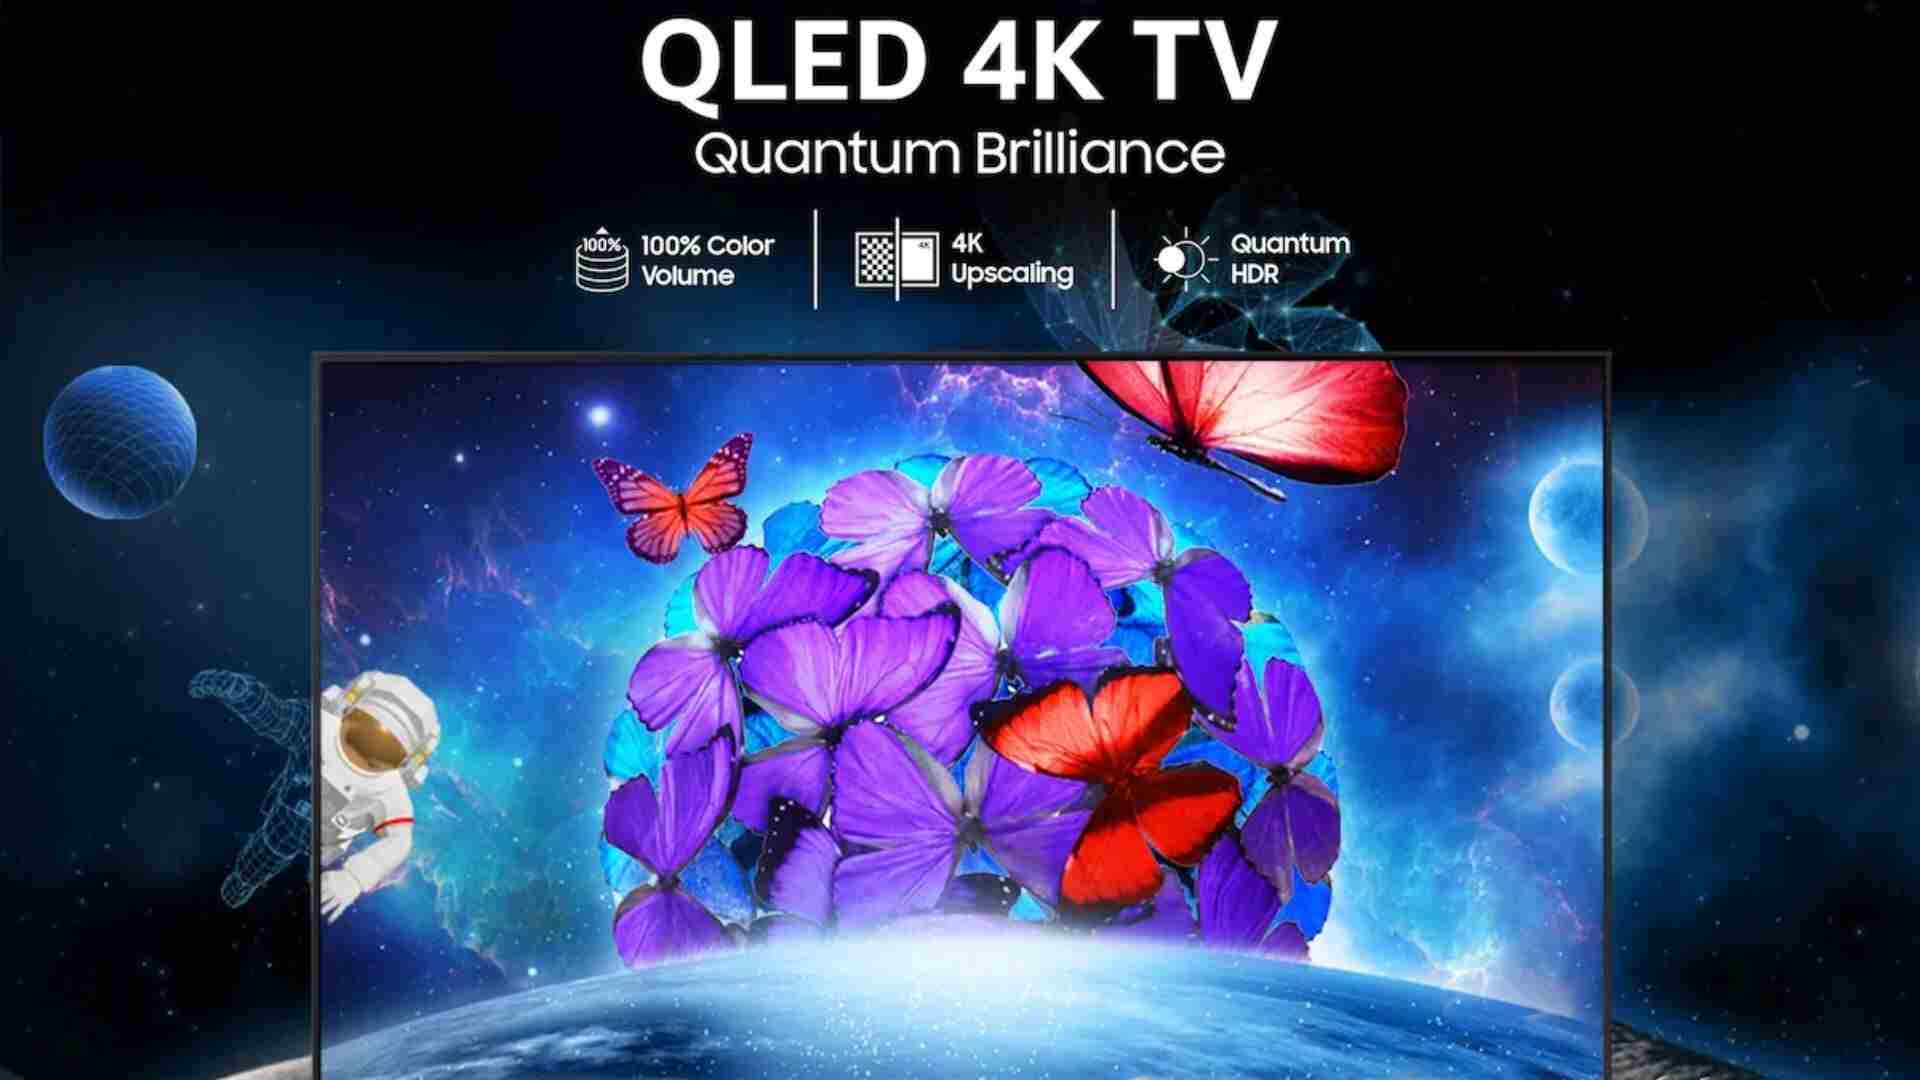 Check details and prices of Samsung's new QLED 4K TV Series